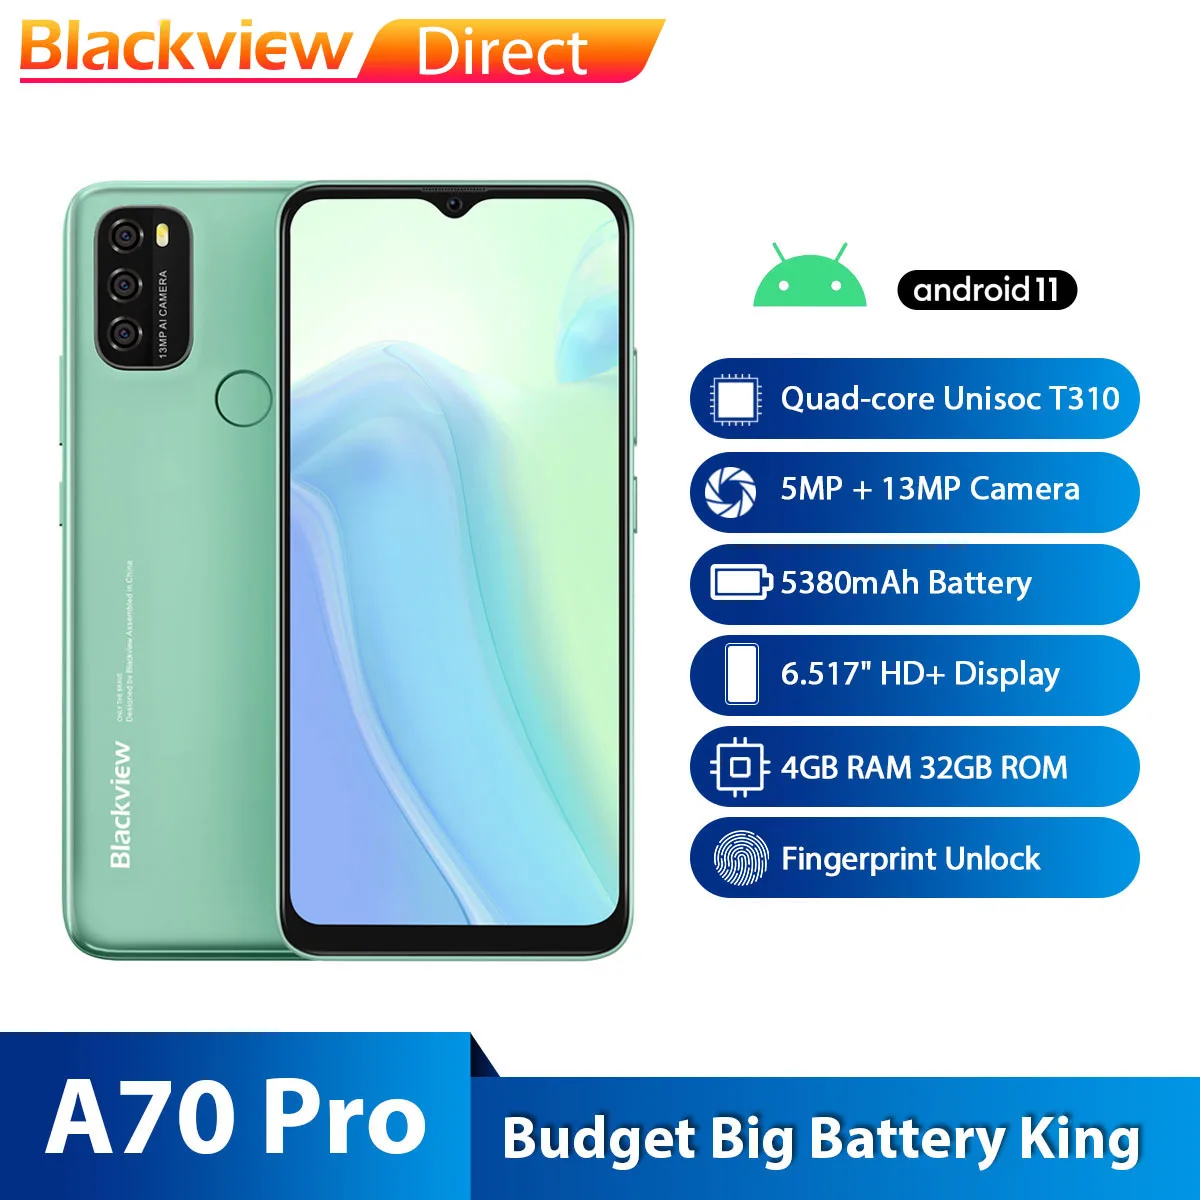 BLACKVIEW A70 Pro Android 11 Smartphone 6.517 Inch Display Quad Core 4GB RAM+32GB ROM 5380mAh 13MP + 5MP Camera 4G Mobile Phone